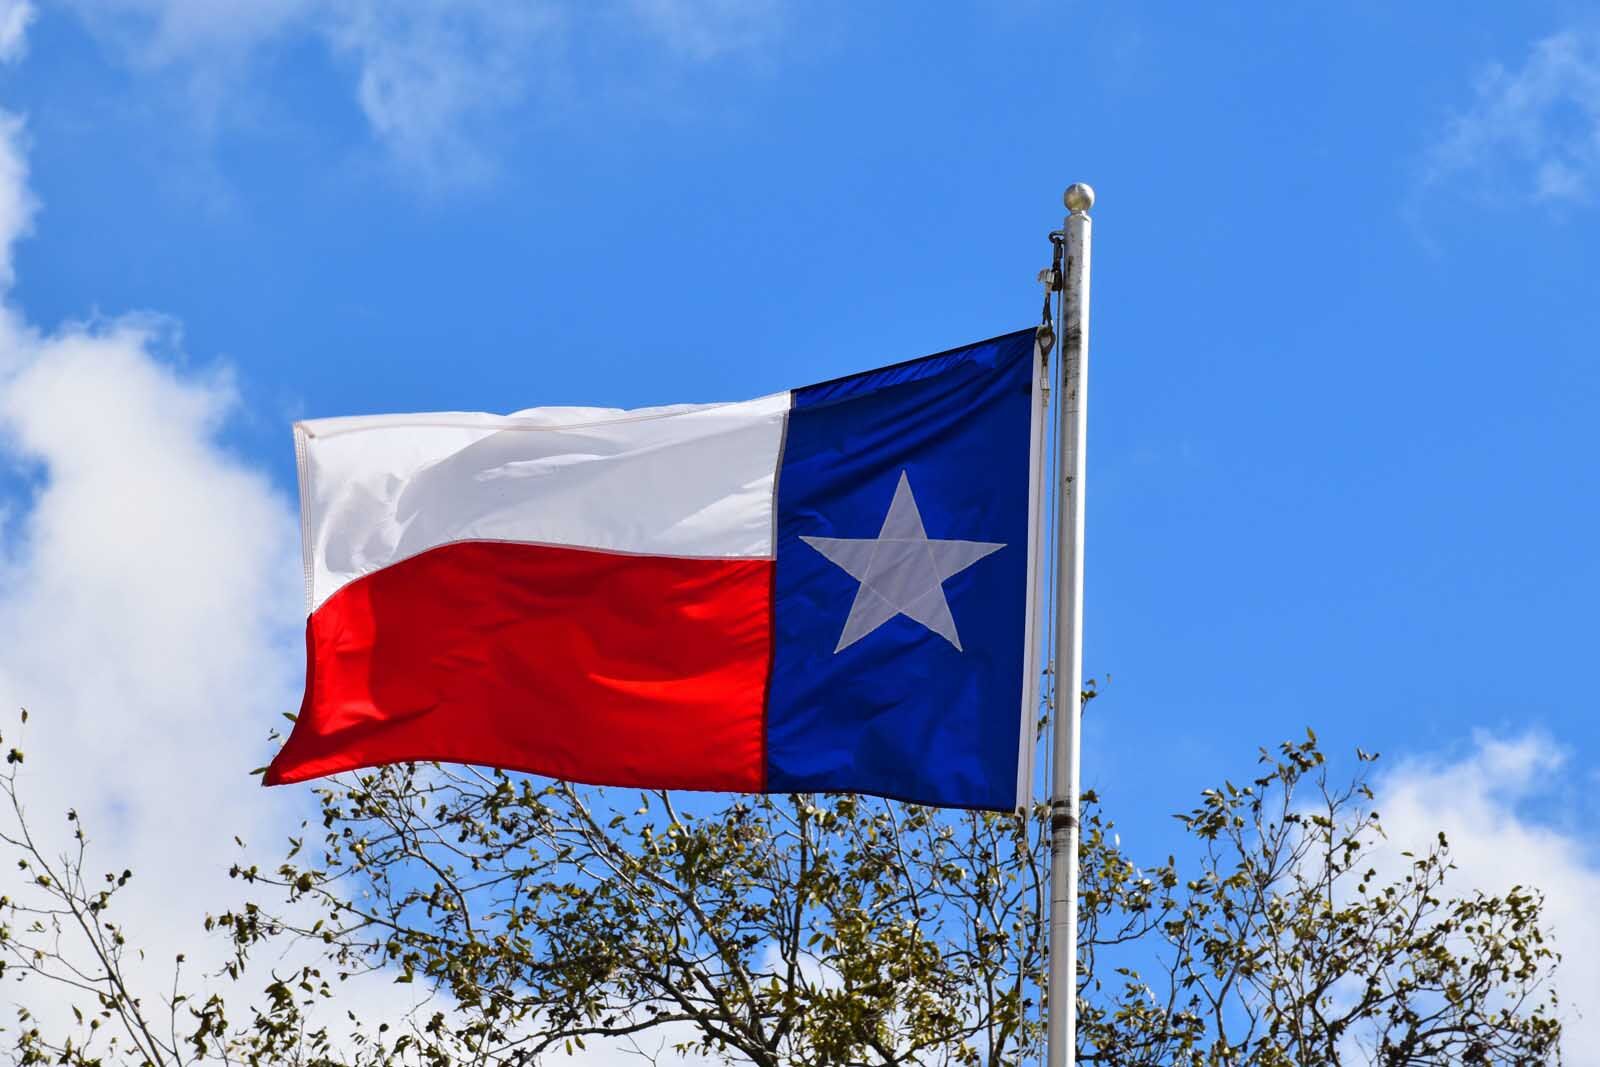 Facts about Lone Star Texas